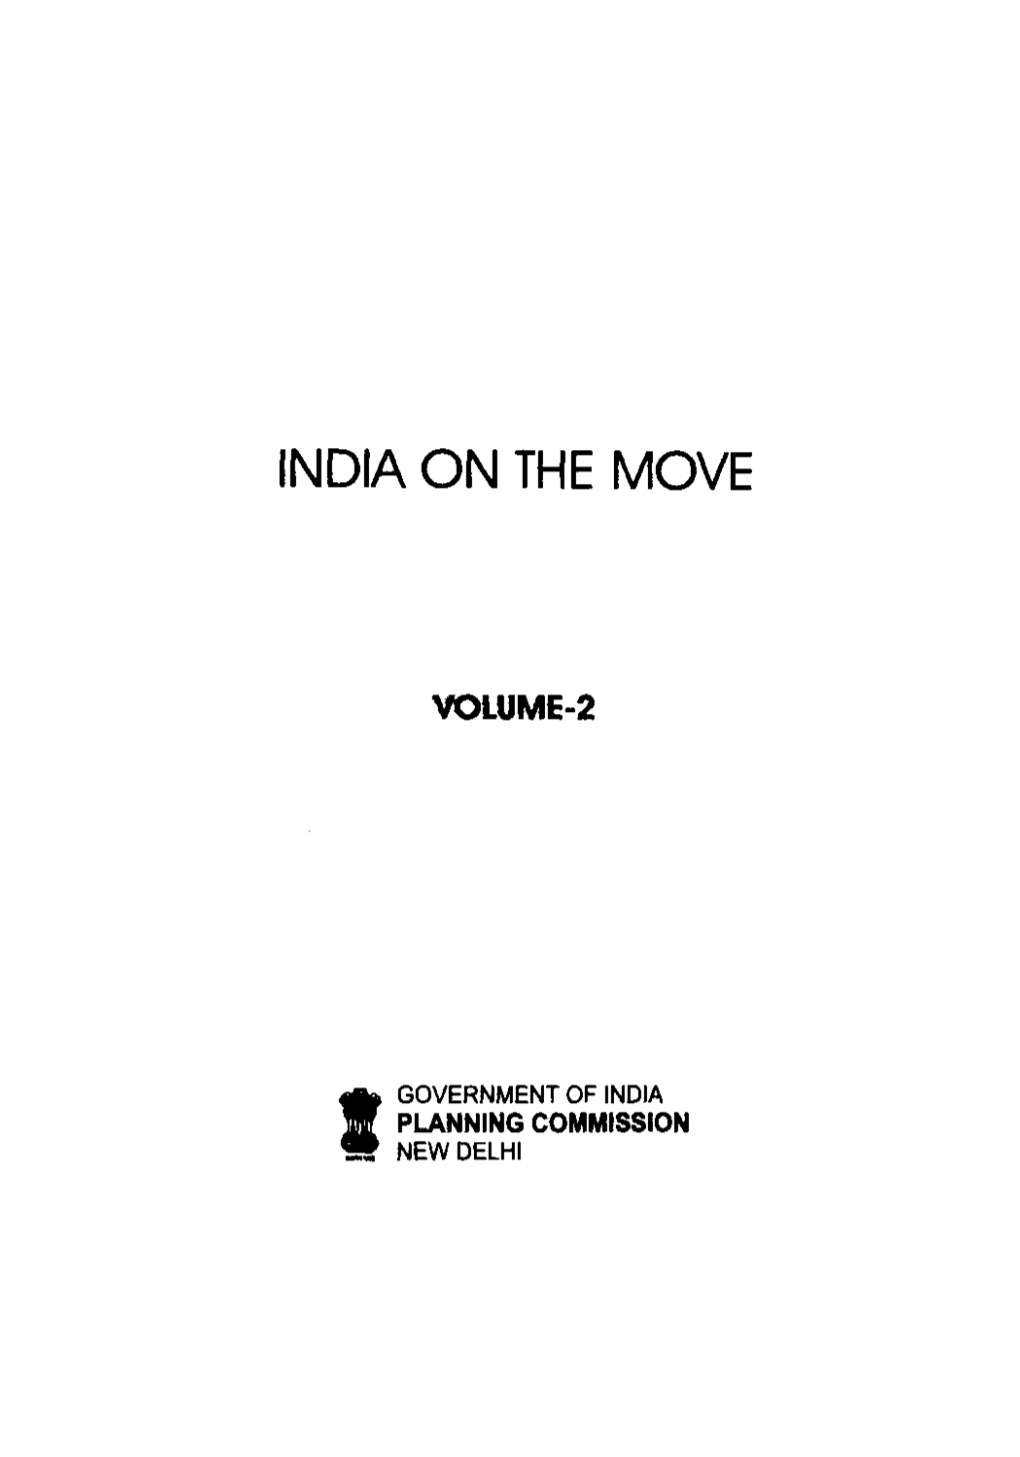 India on the Move